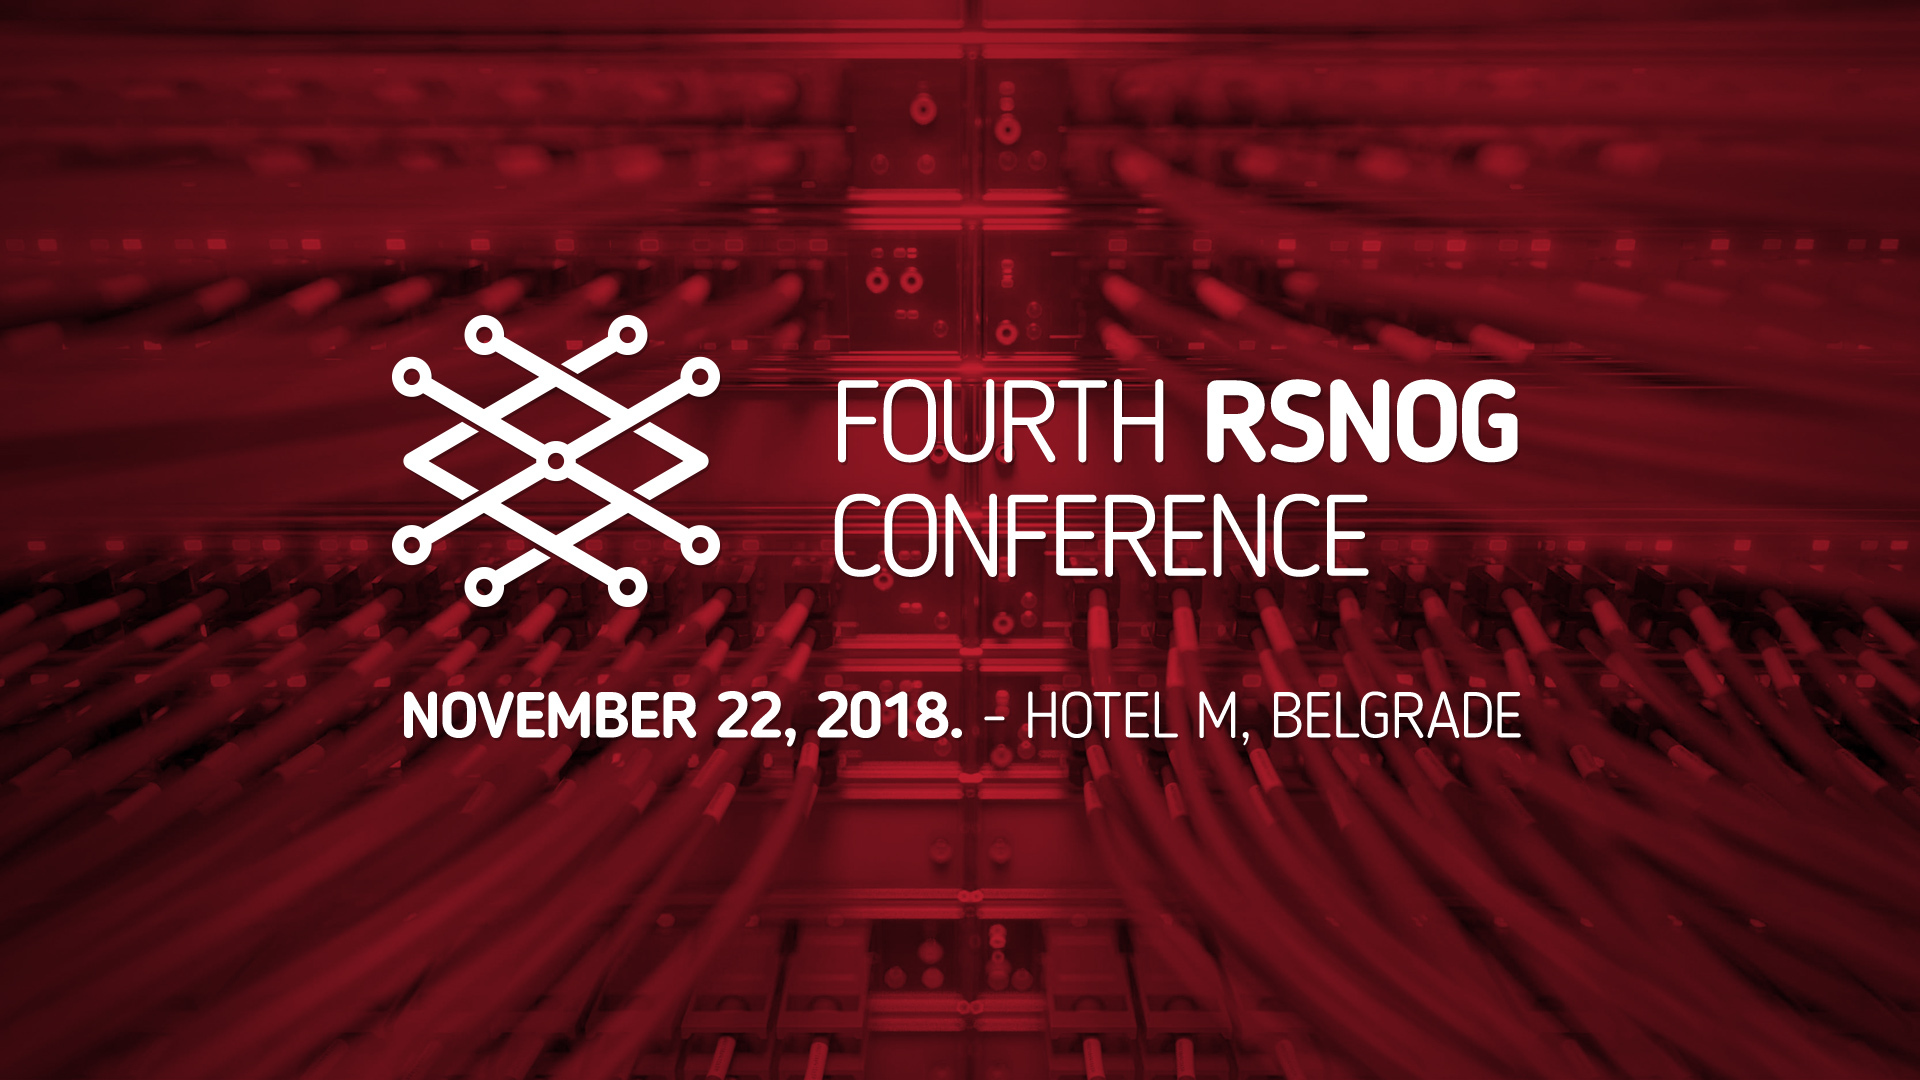 Registrations now open for Fourth RSNOG conference